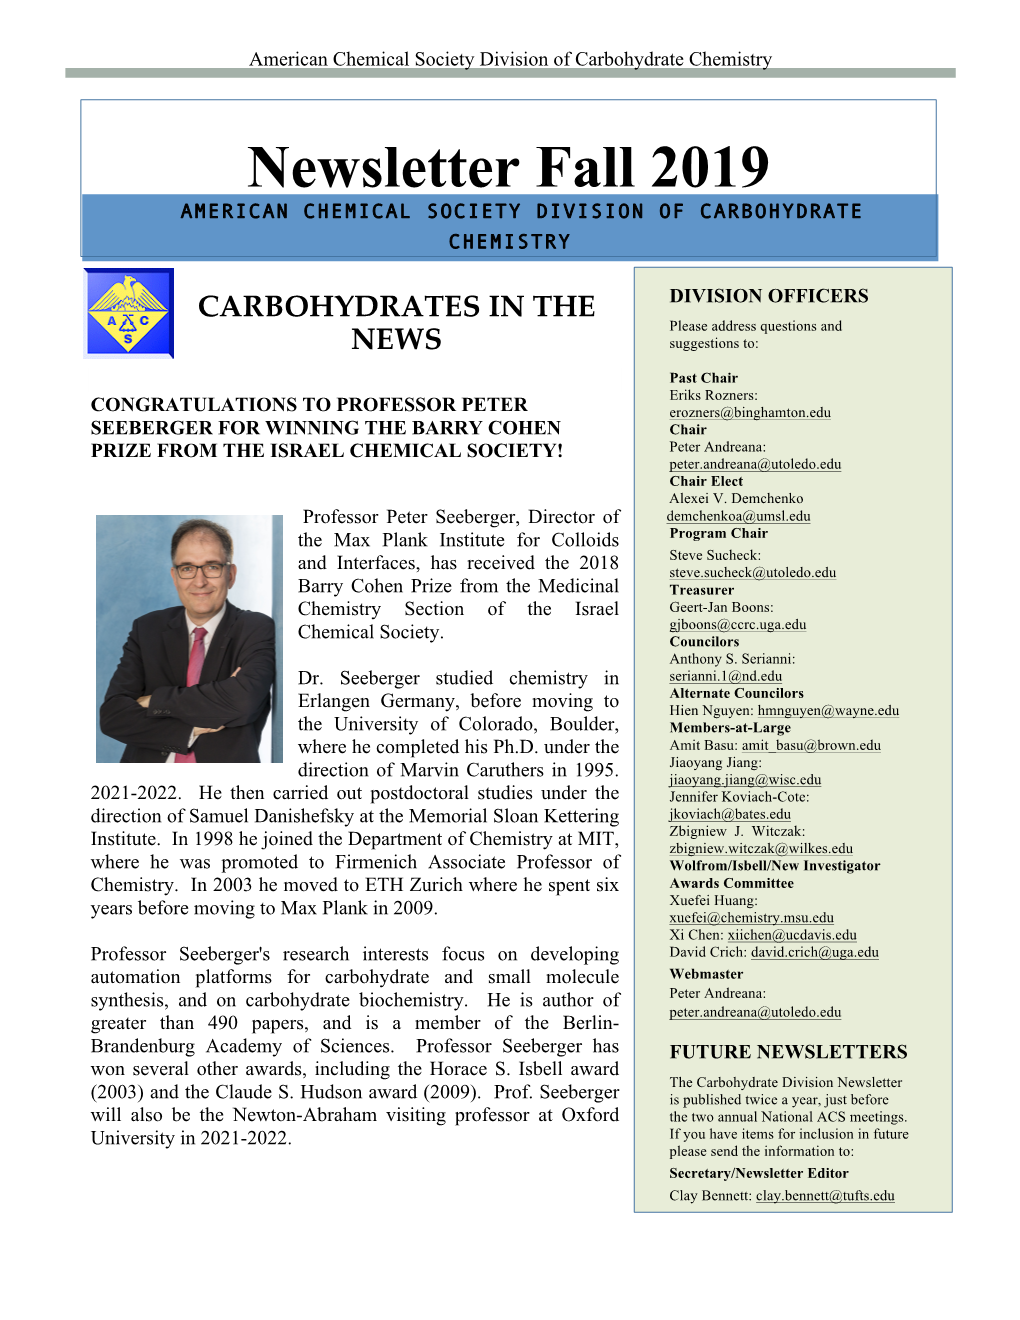 Fall 2019 AMERICAN CHEMICAL SOCIETY DIVISION of CARBOHYDRATE CHEMISTRY